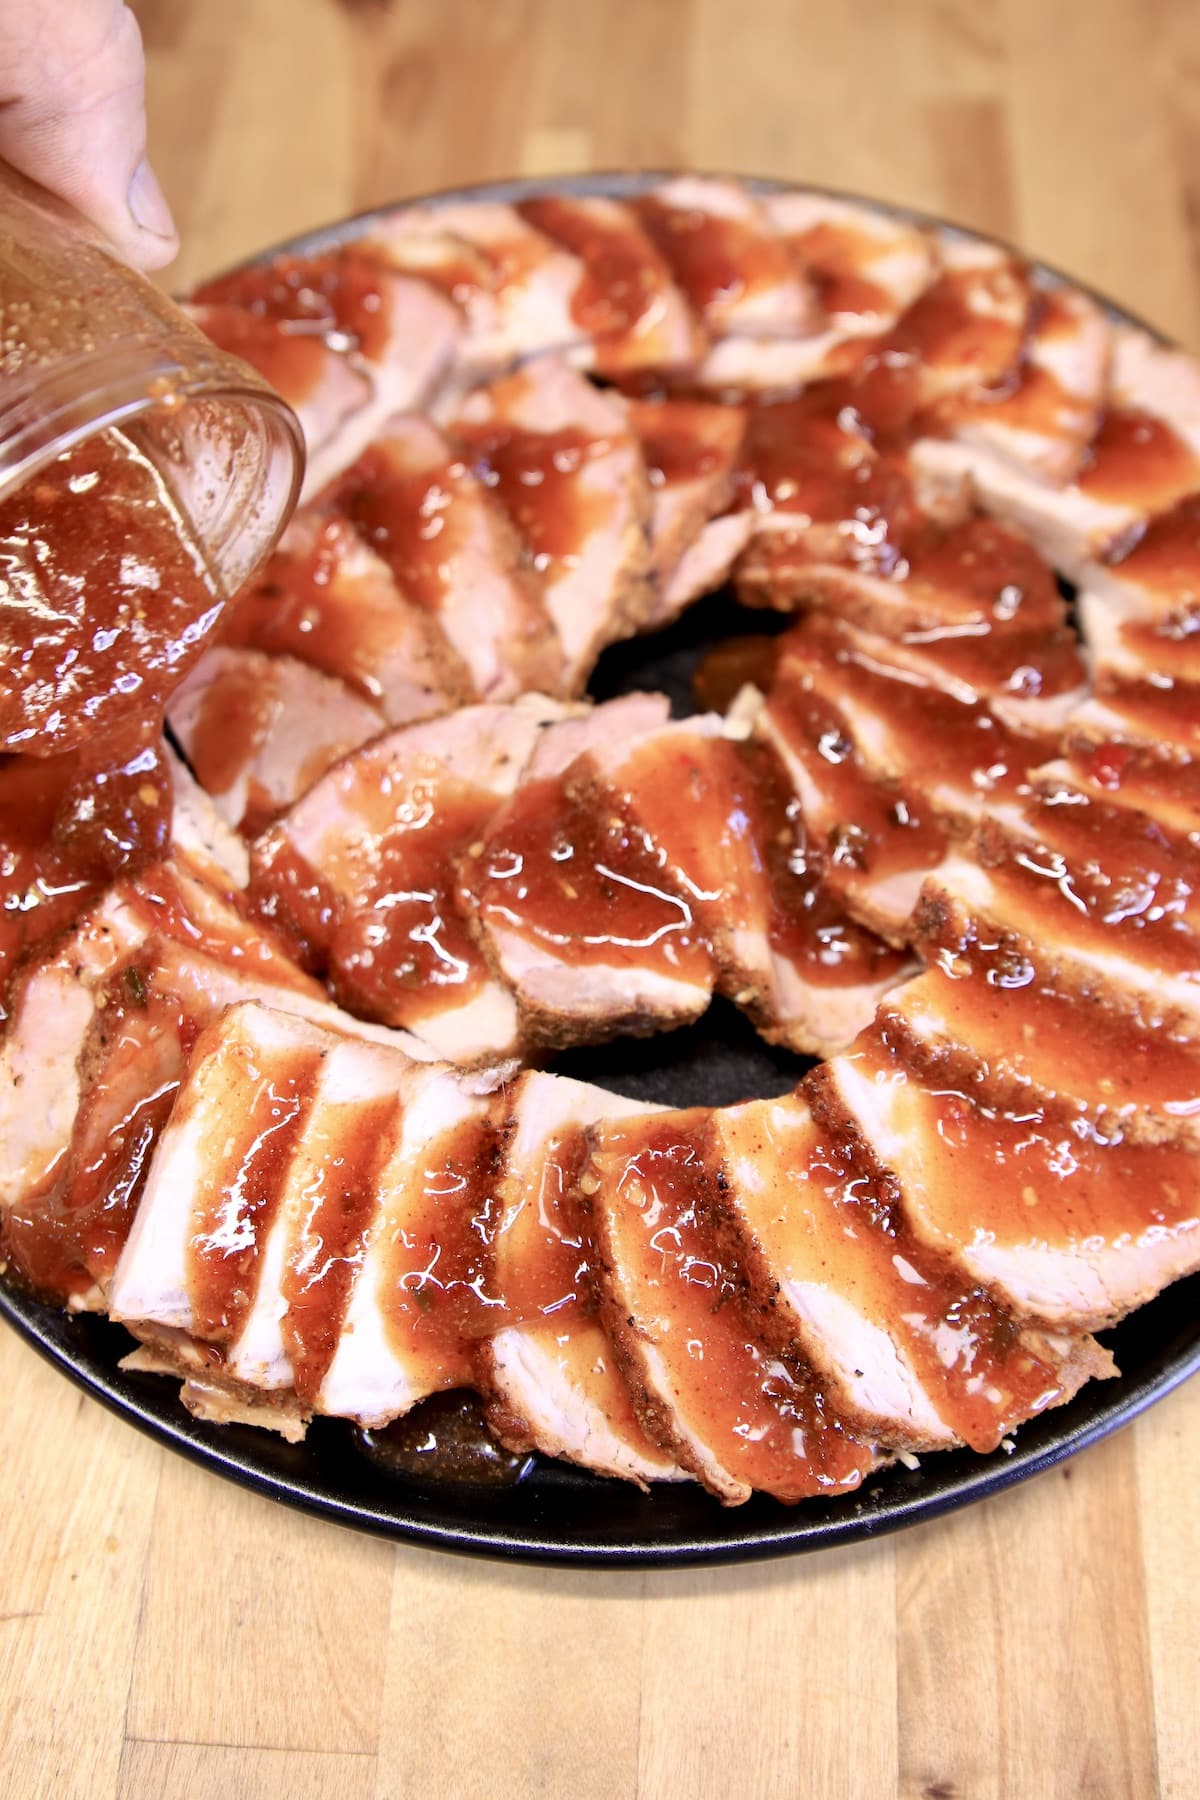 Pouring bbq sauce over sliced pork loin on a round platter.